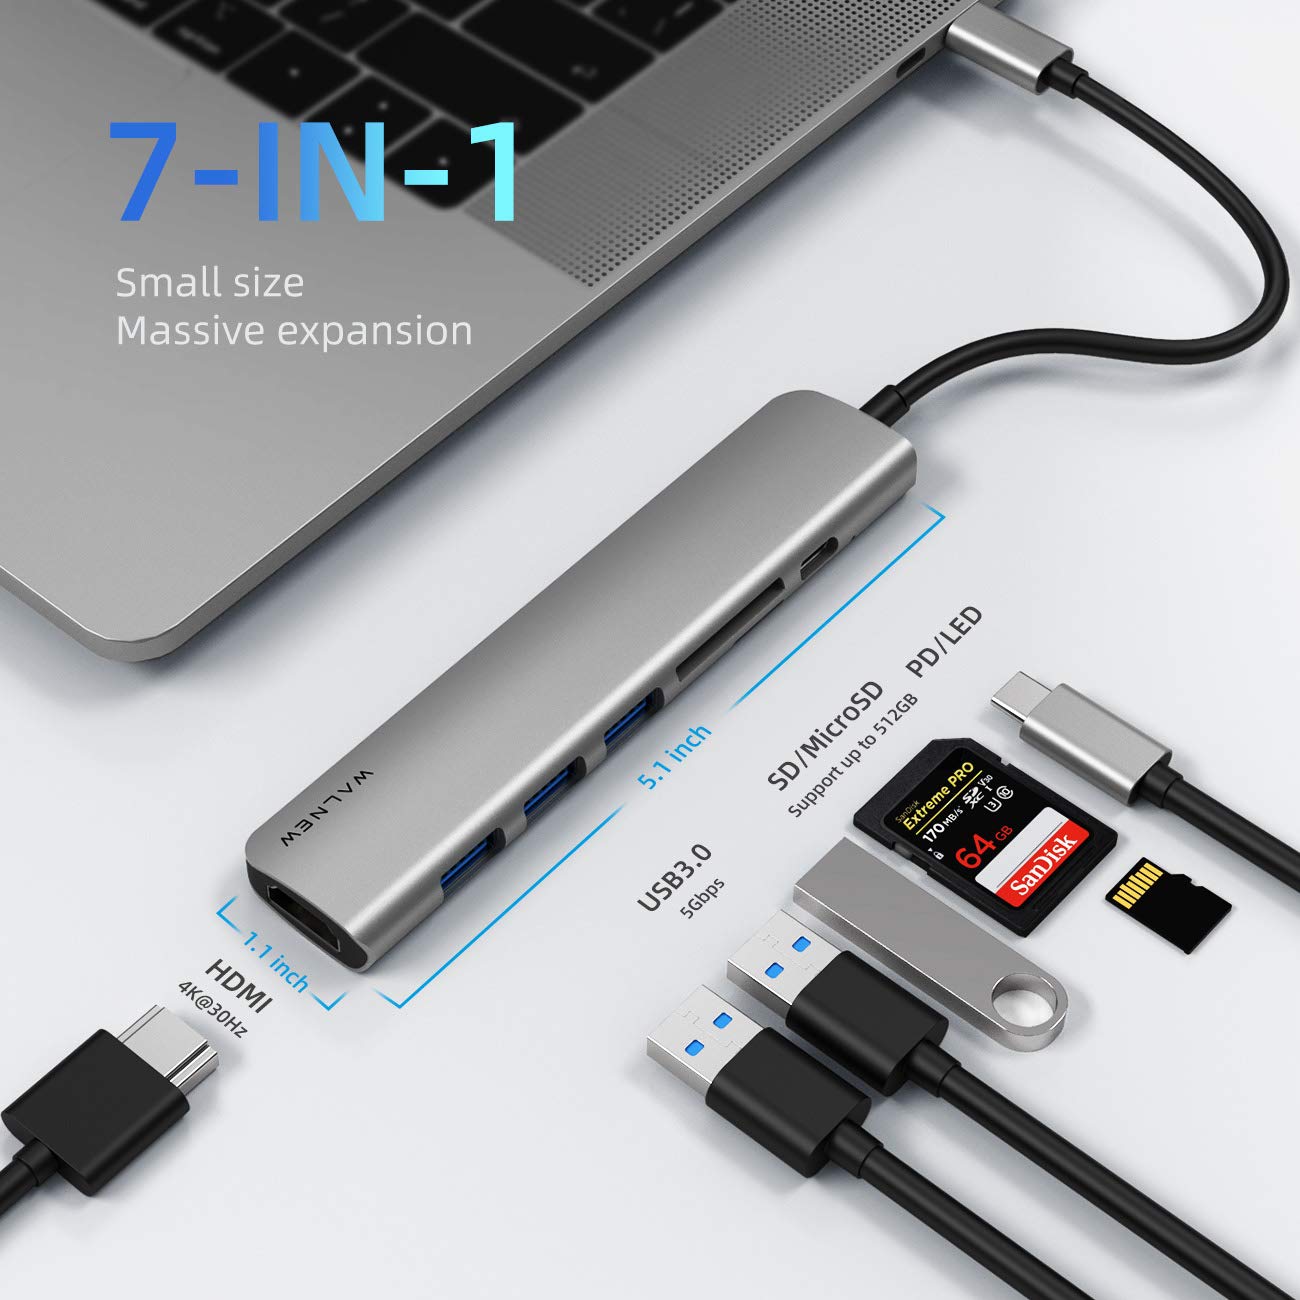 WALNEW USB C Hub, USBC Dongle Multiport Adapter with 4K HDMI,100W PD,SD/TF Reader,USB 3.0 Ports, 7 in 1 Type-C Docking Station for Mac/Macbook,iPad Pro/Air,Samsung Galaxy Tab,Surface Laptop,Chromebook